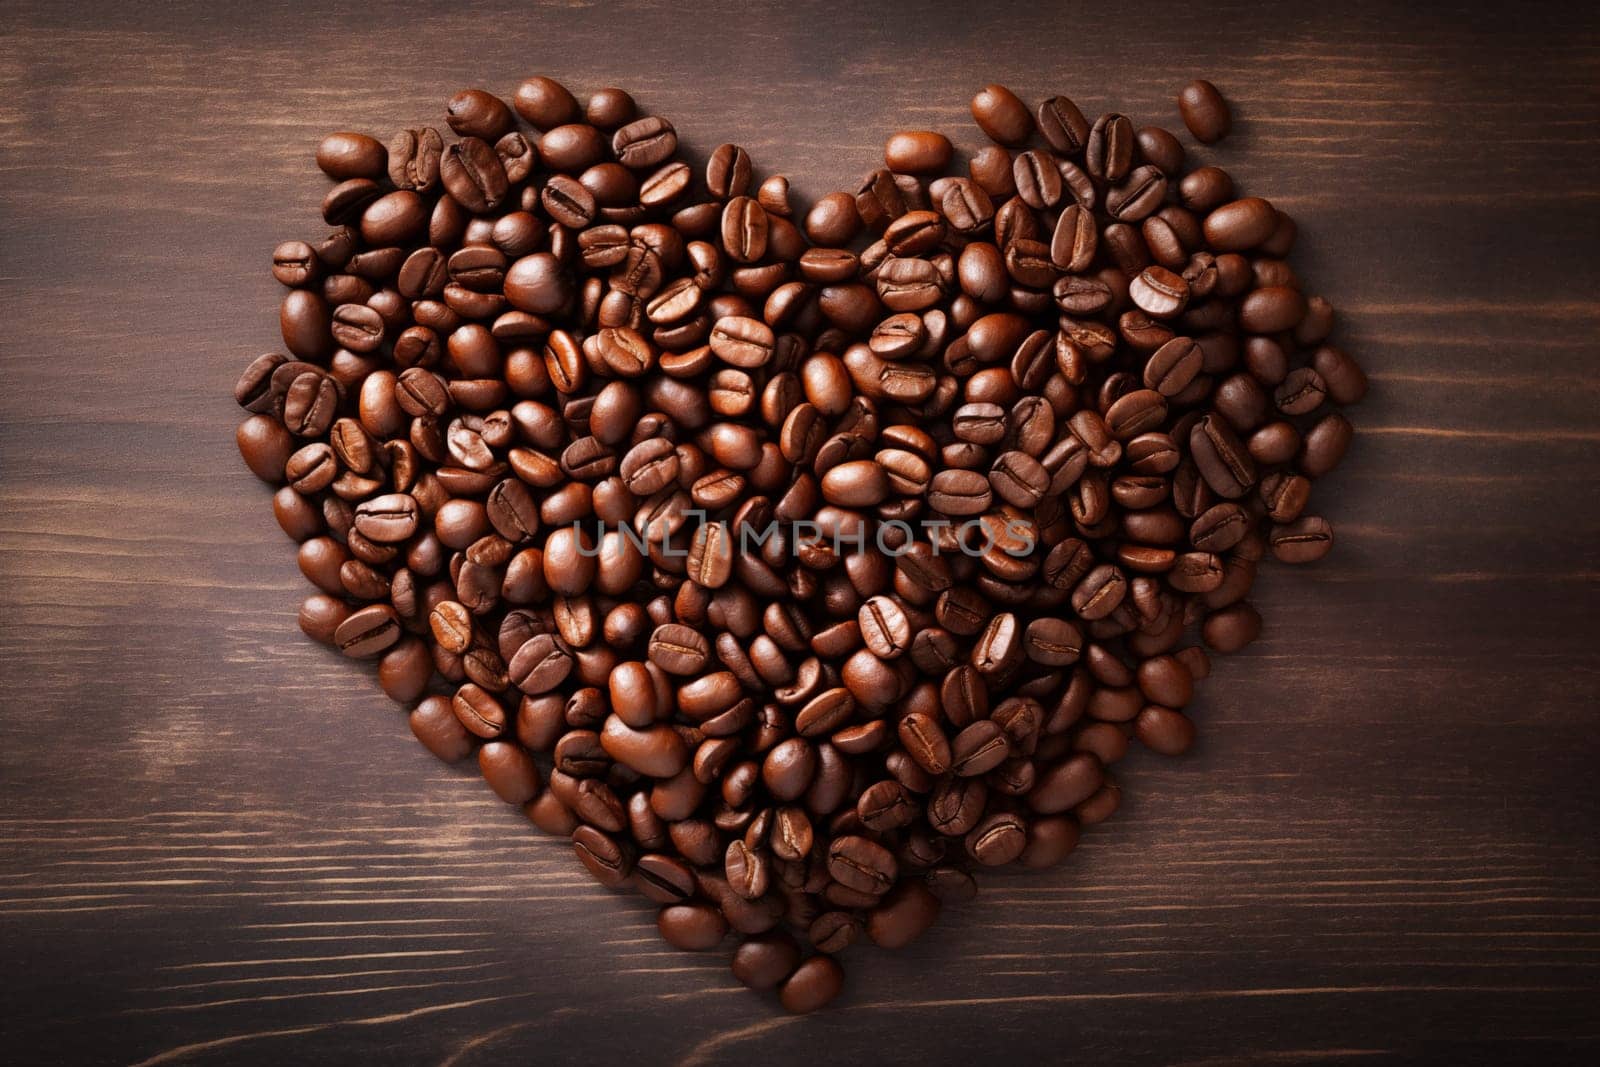 Heart-Shaped Coffee Beans on Wooden Background by dimol